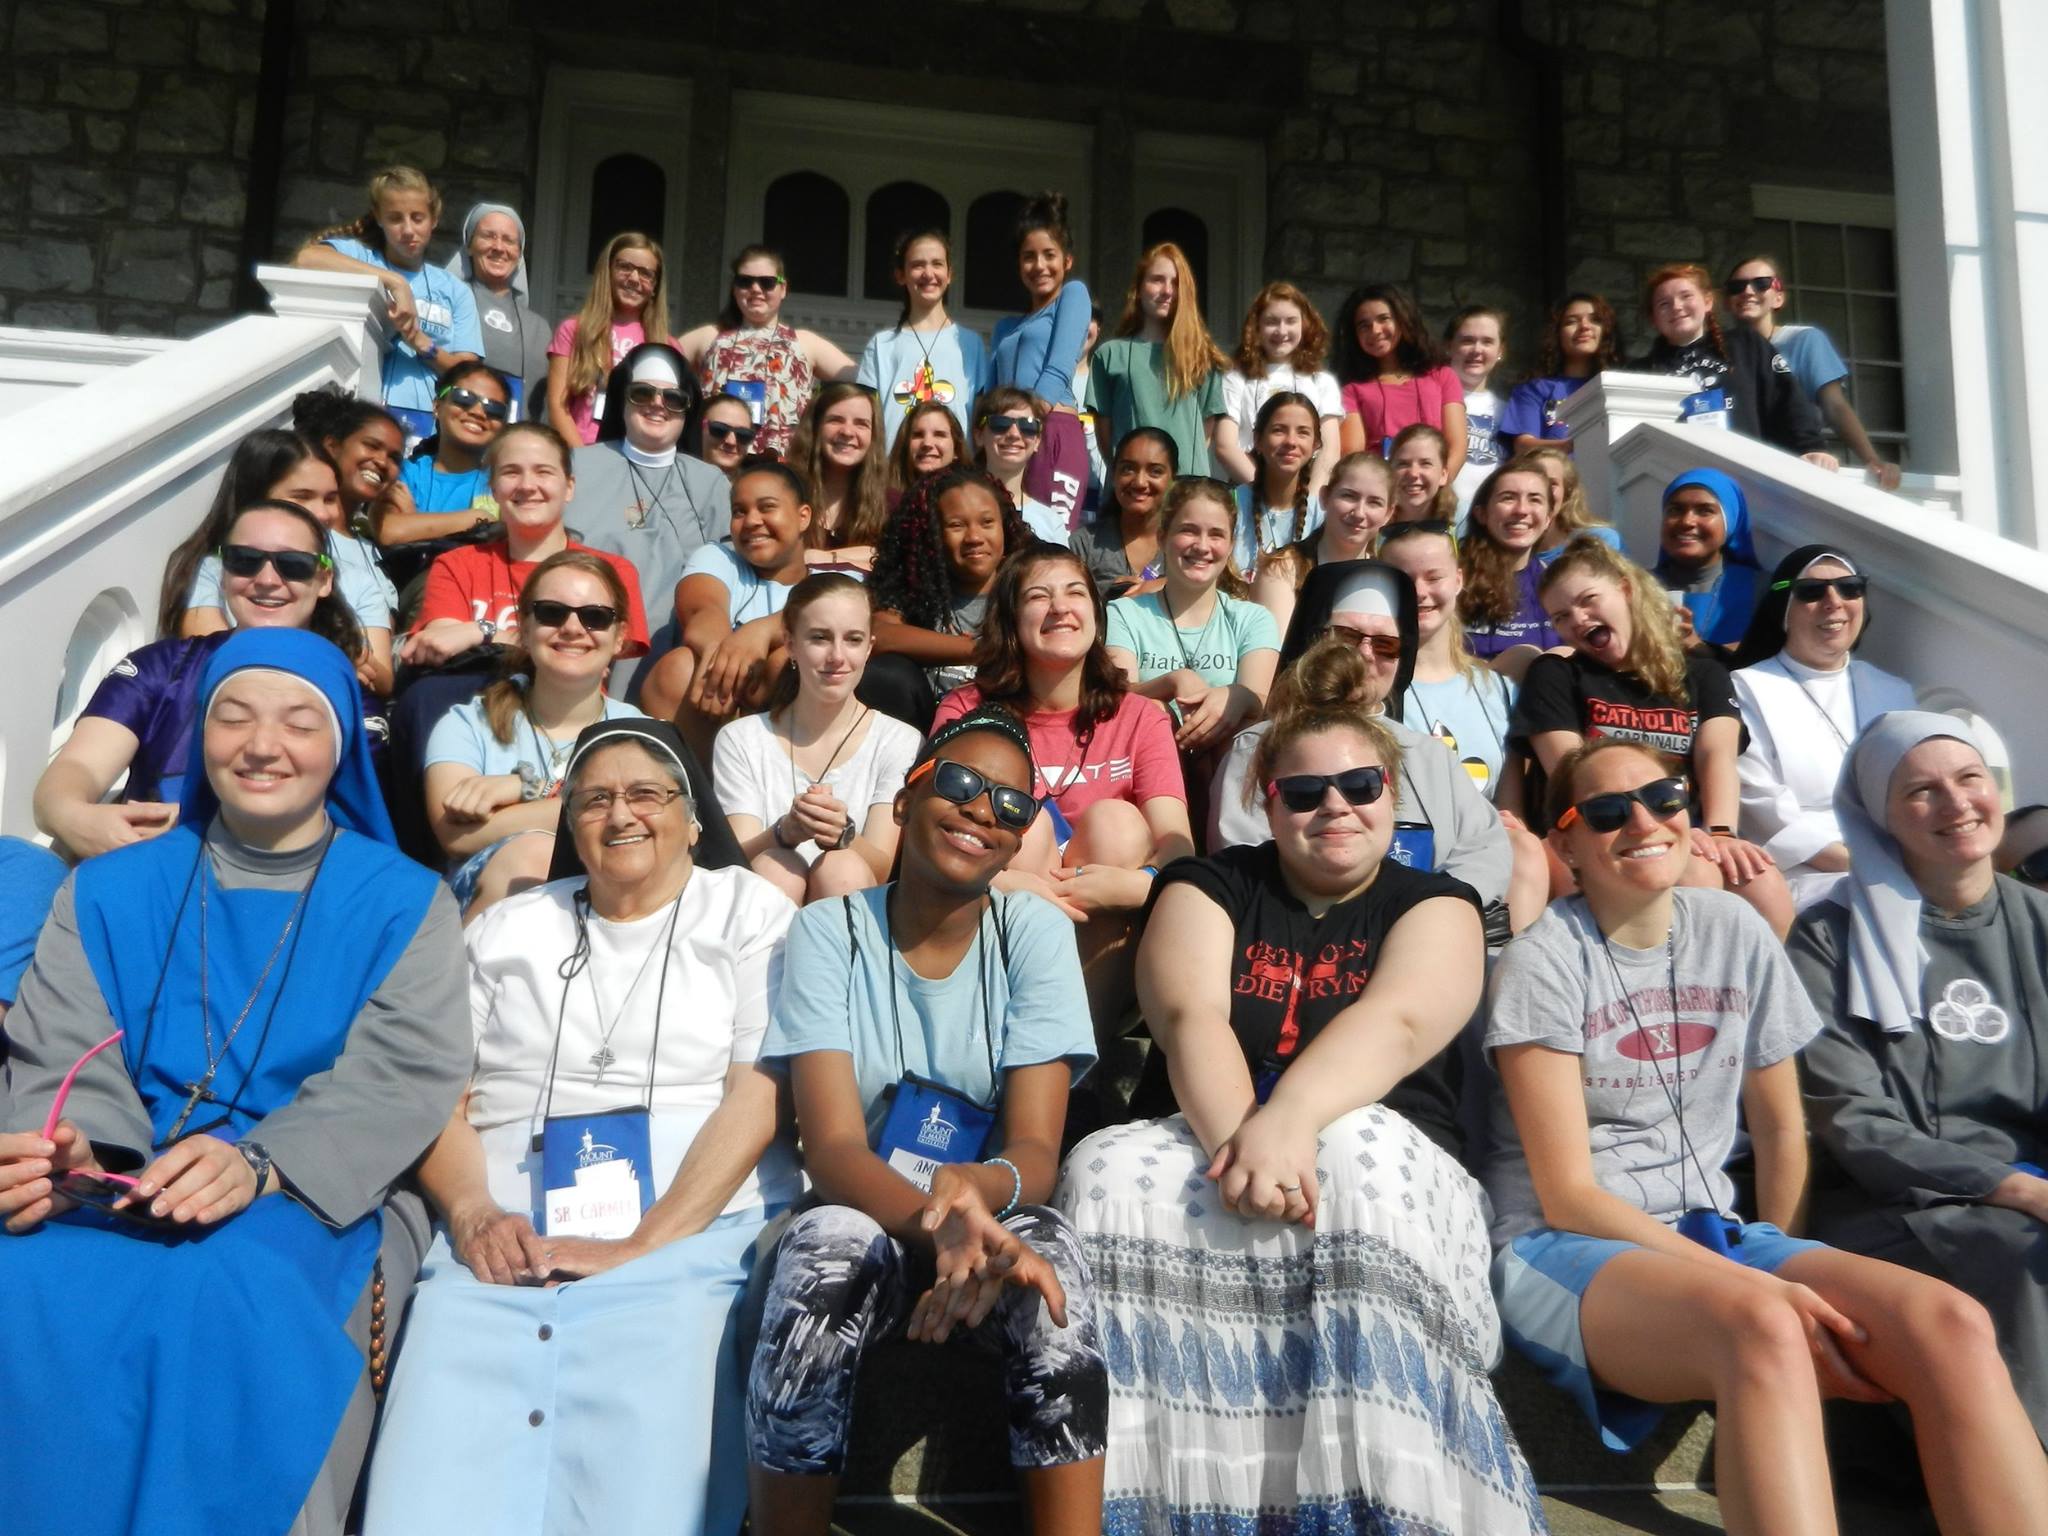 Fiat Retreat 2017 draws young women in journey to find will of God